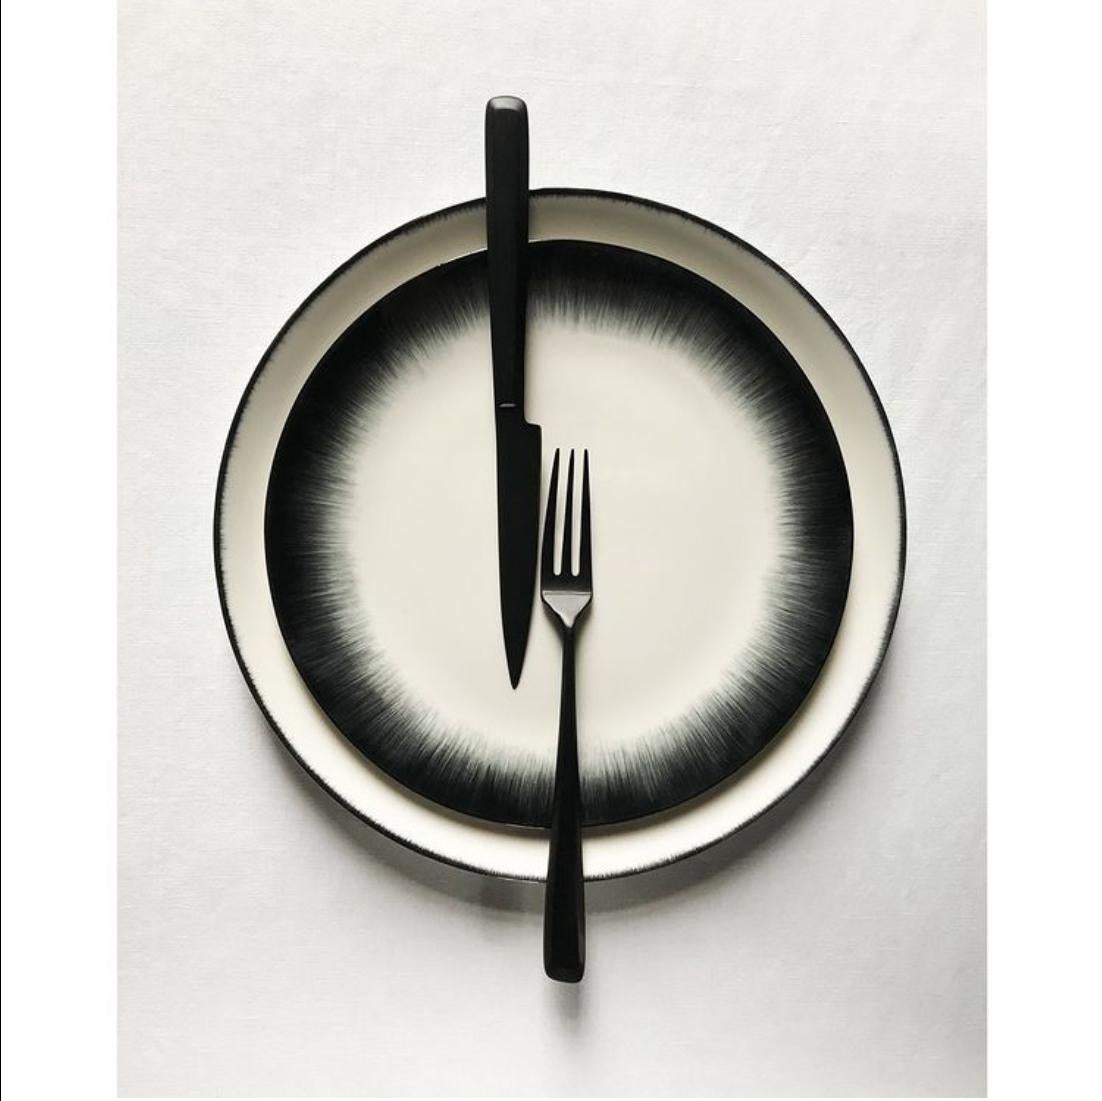 Ann Demeulemeester 27 cm High Plates (set of two) In New Condition For Sale In Laguna Beach, CA